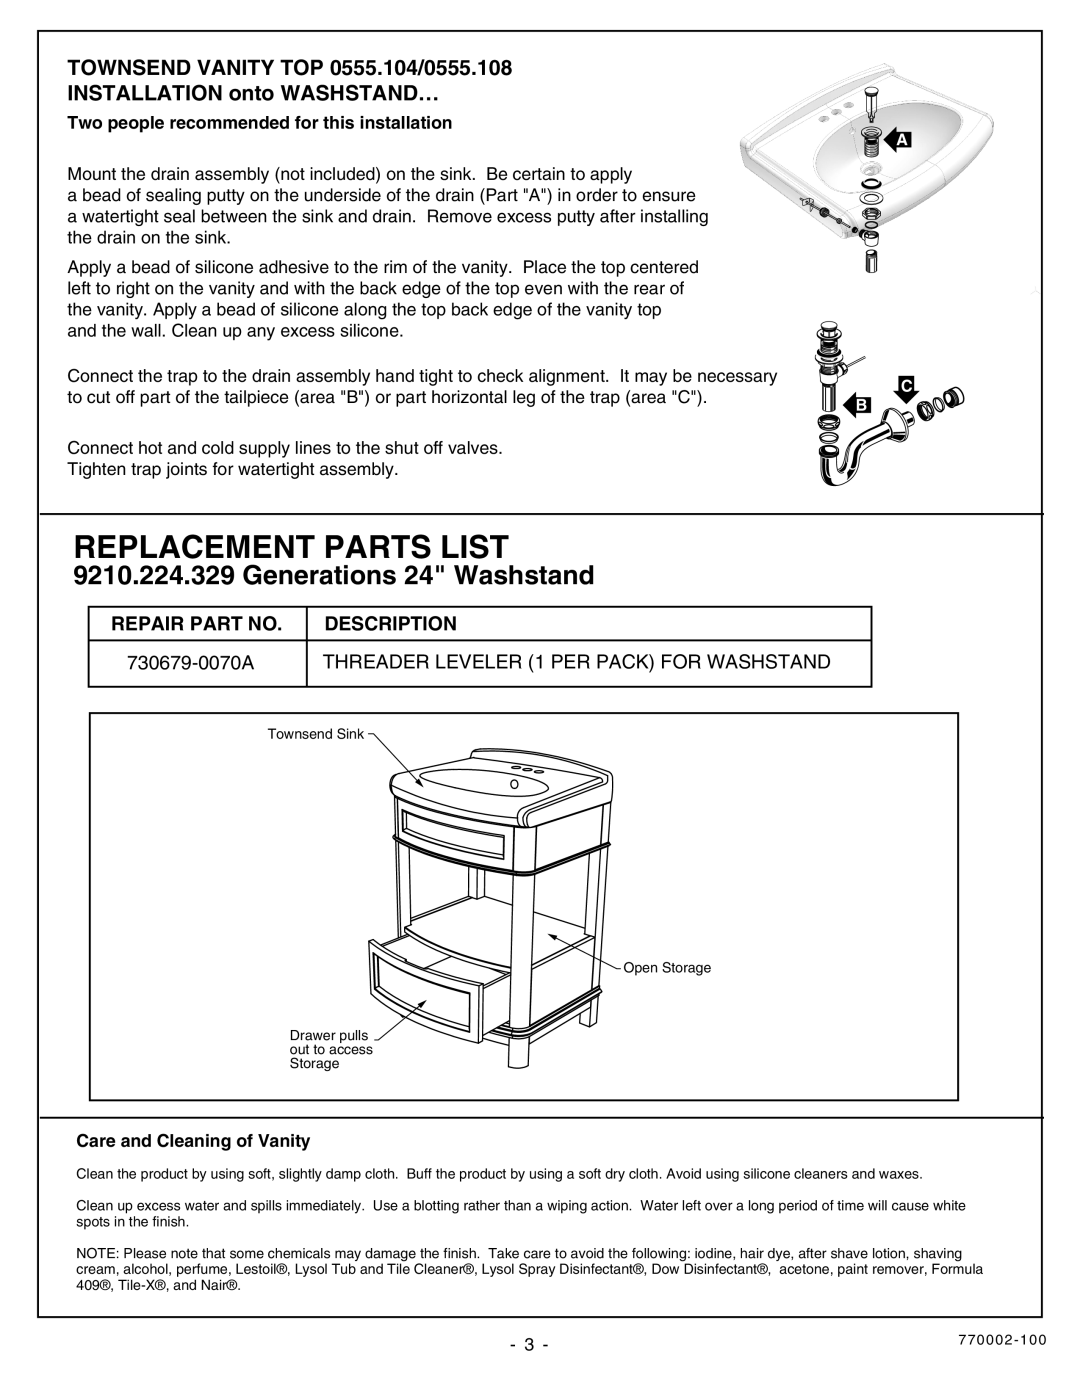 American Standard 9210.224.329 Replacement Parts List, TOWNSEND VANITY TOP 0555.104/0555.108, INSTALLATION onto WASHSTAND… 